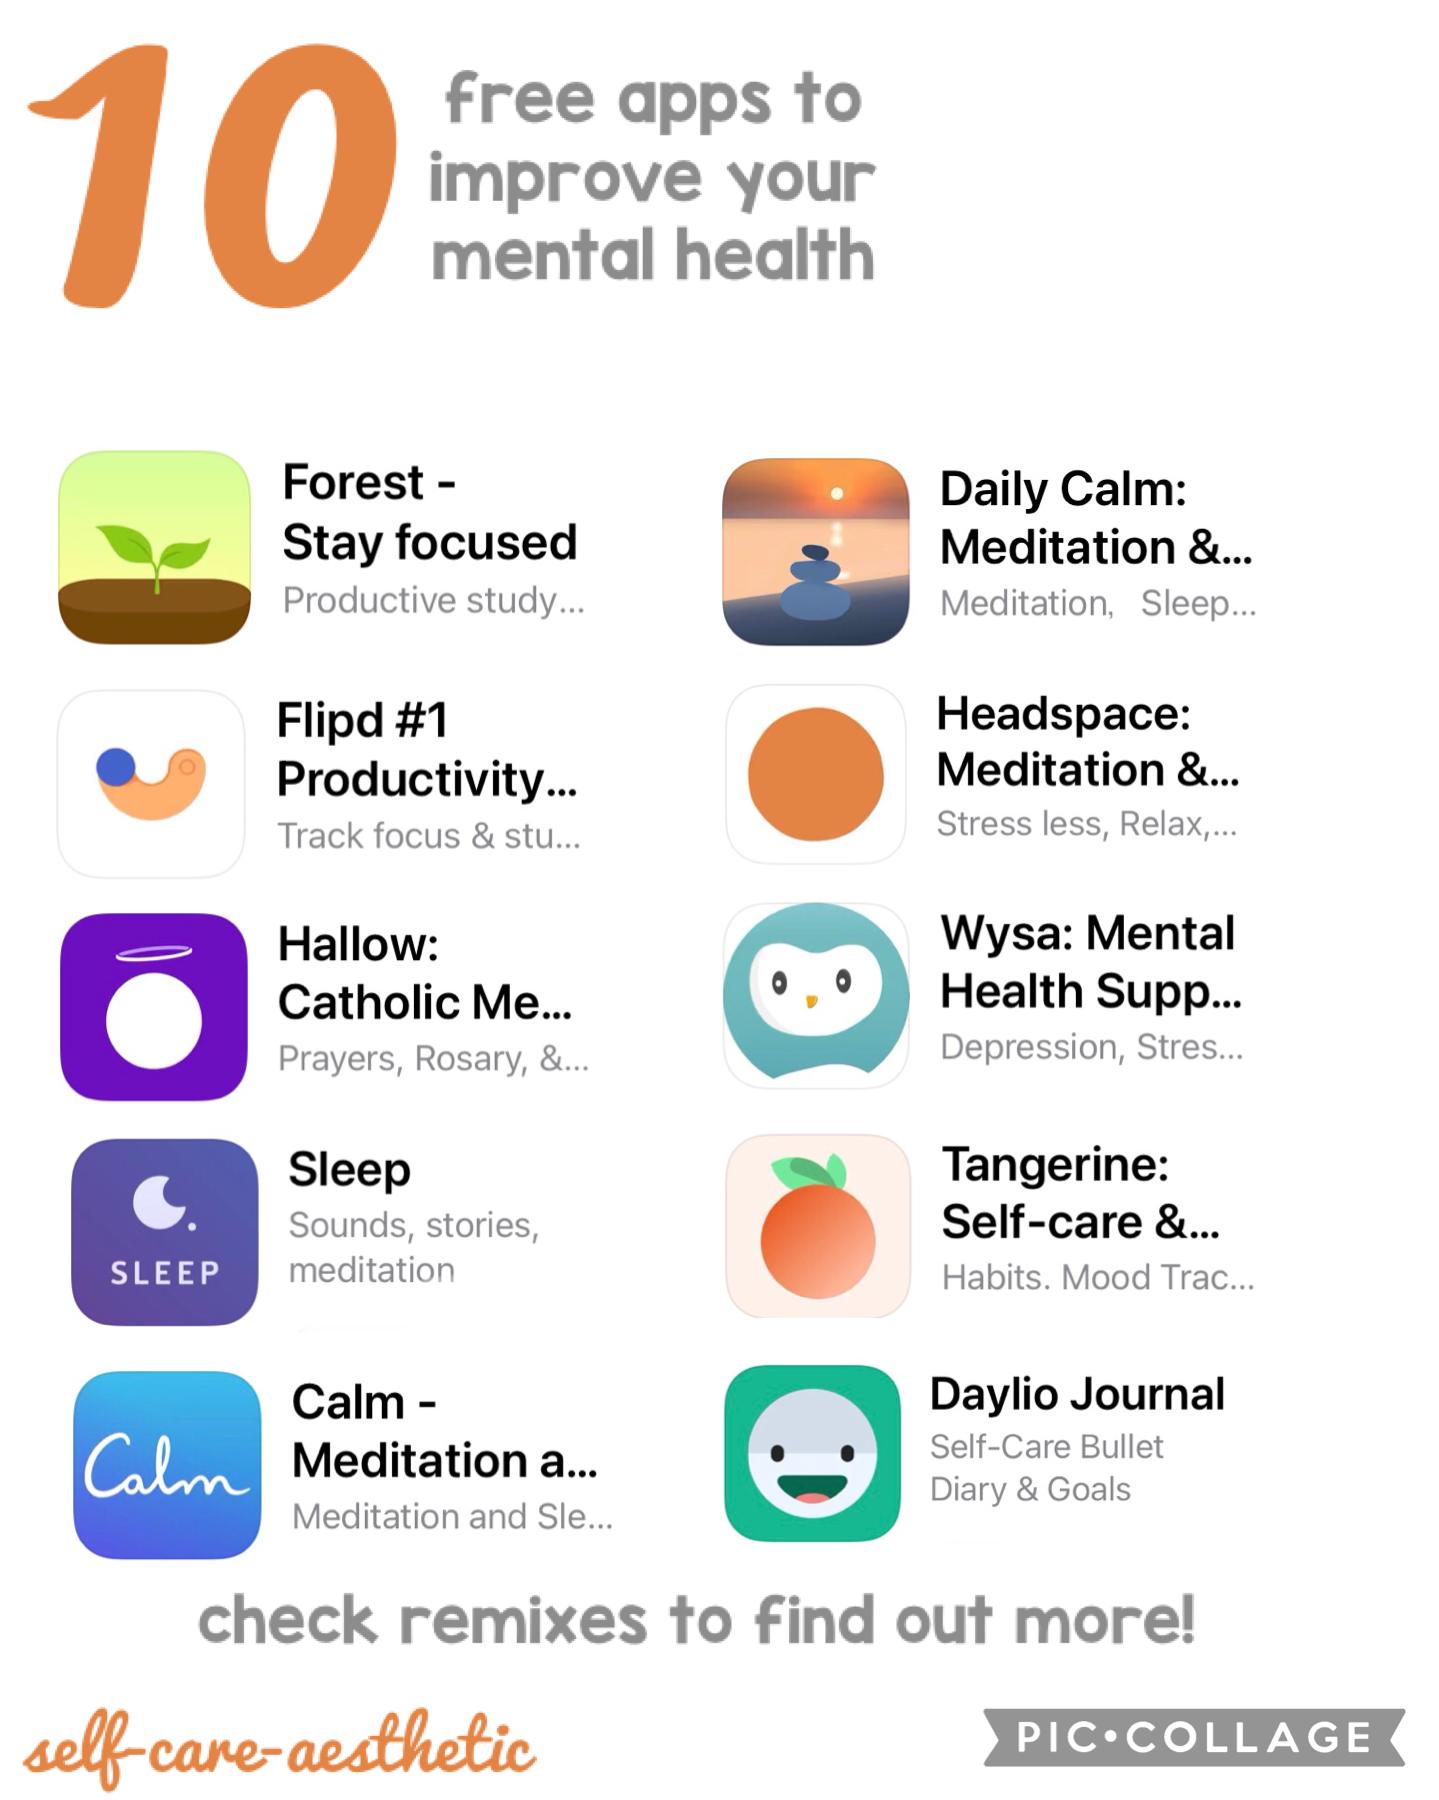 🧡tap🧡
10 free apps to improve your mental health!
Please check remixes for details about the apps 🧡
Thx for all the positive feedback on the box tutorial! I’m glad it helped x
If you have any feedback or suggestions for this too pls lmk! 🧡